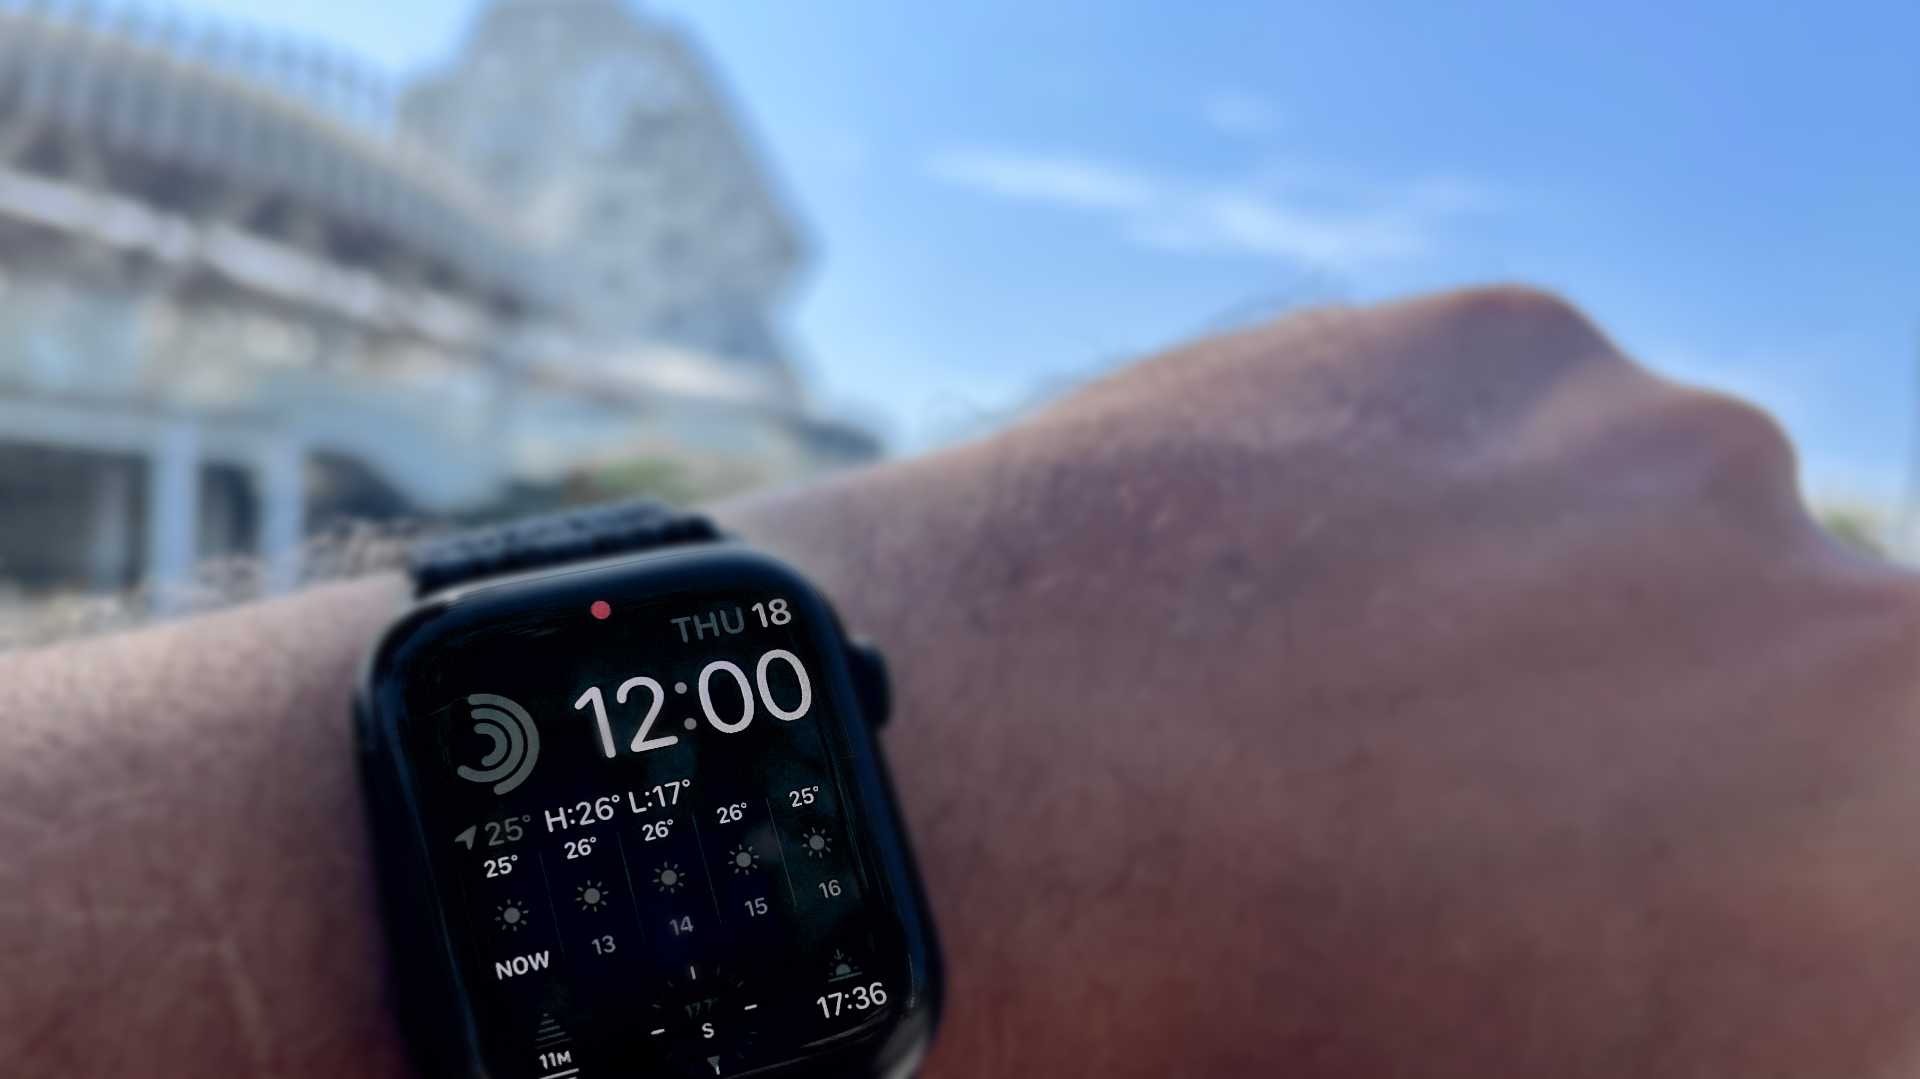 Close-up of an Apple Watch on a wrist, showing the time is 12 noon and the temperature is 25ºC.